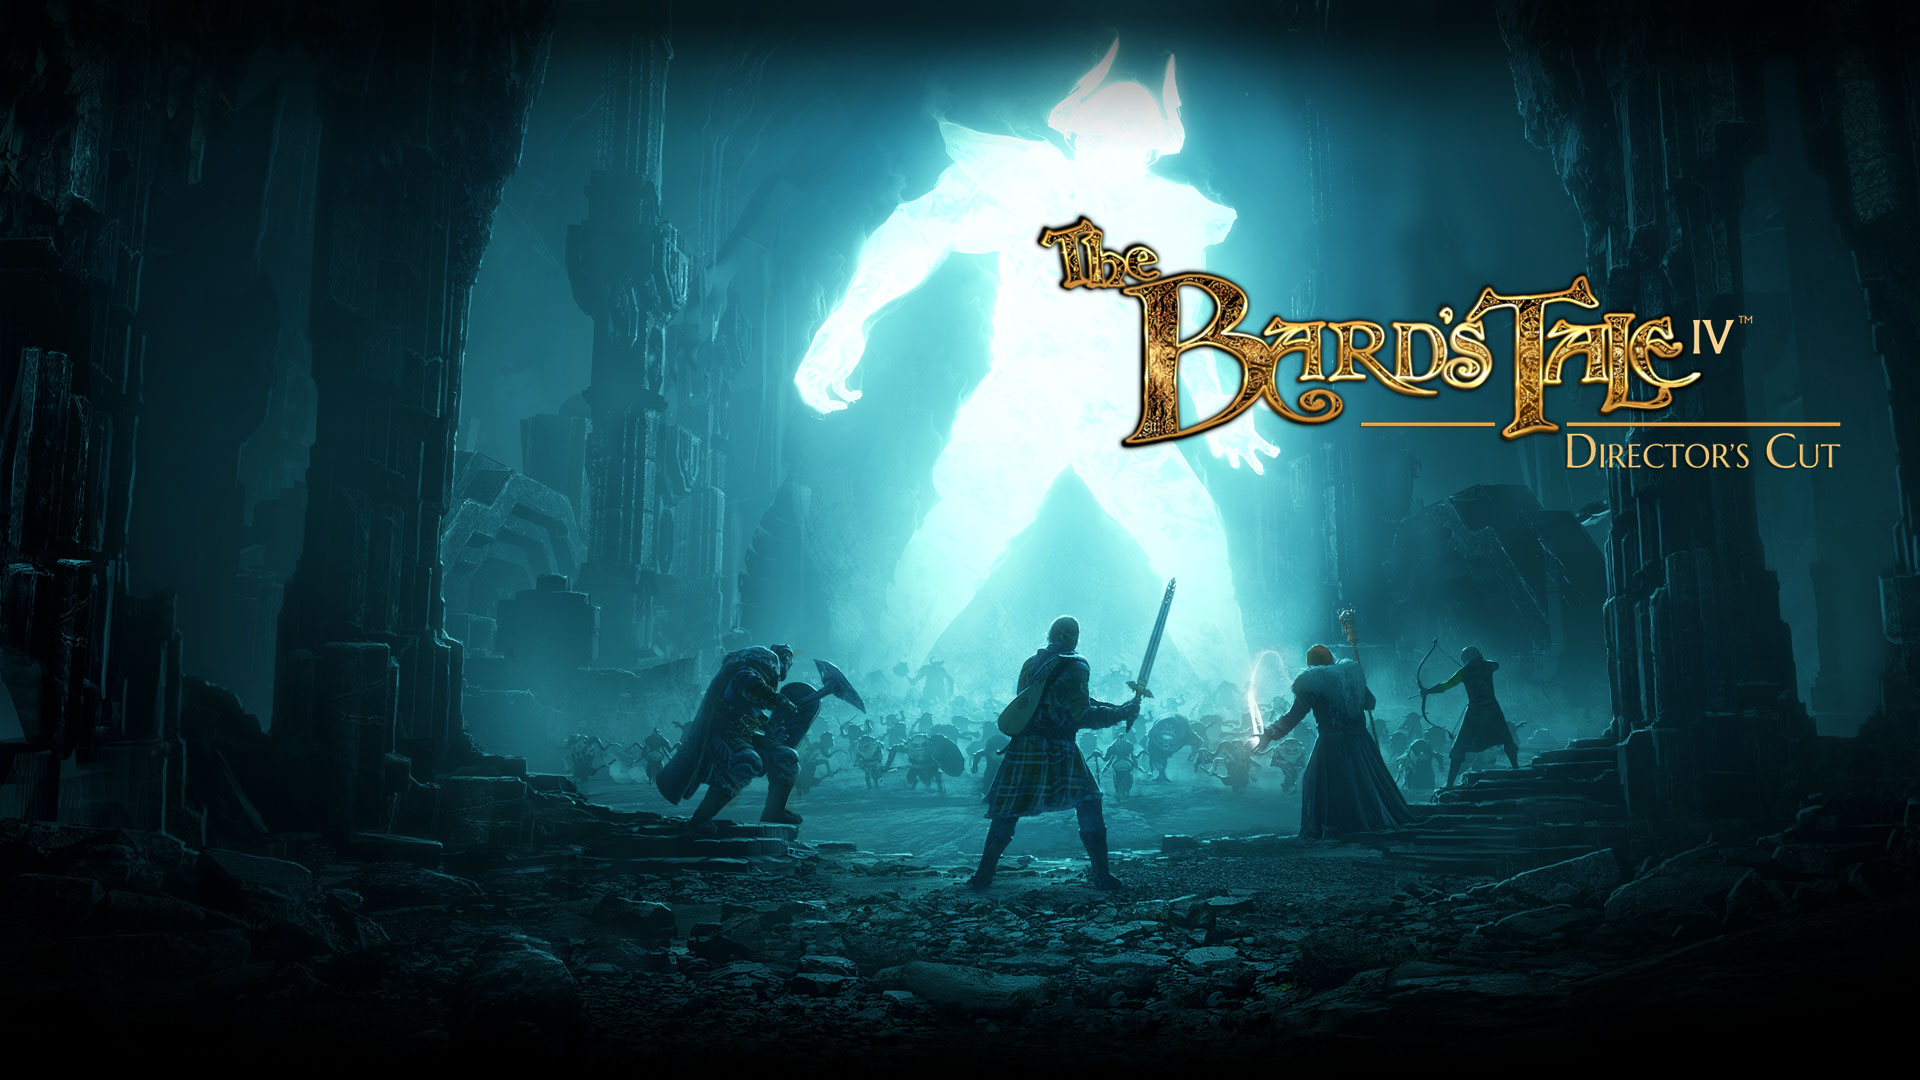 The Bard’s Tale IV: Director’s Cut. Many people fighting a giant glowing creature in a large room with rock pillars